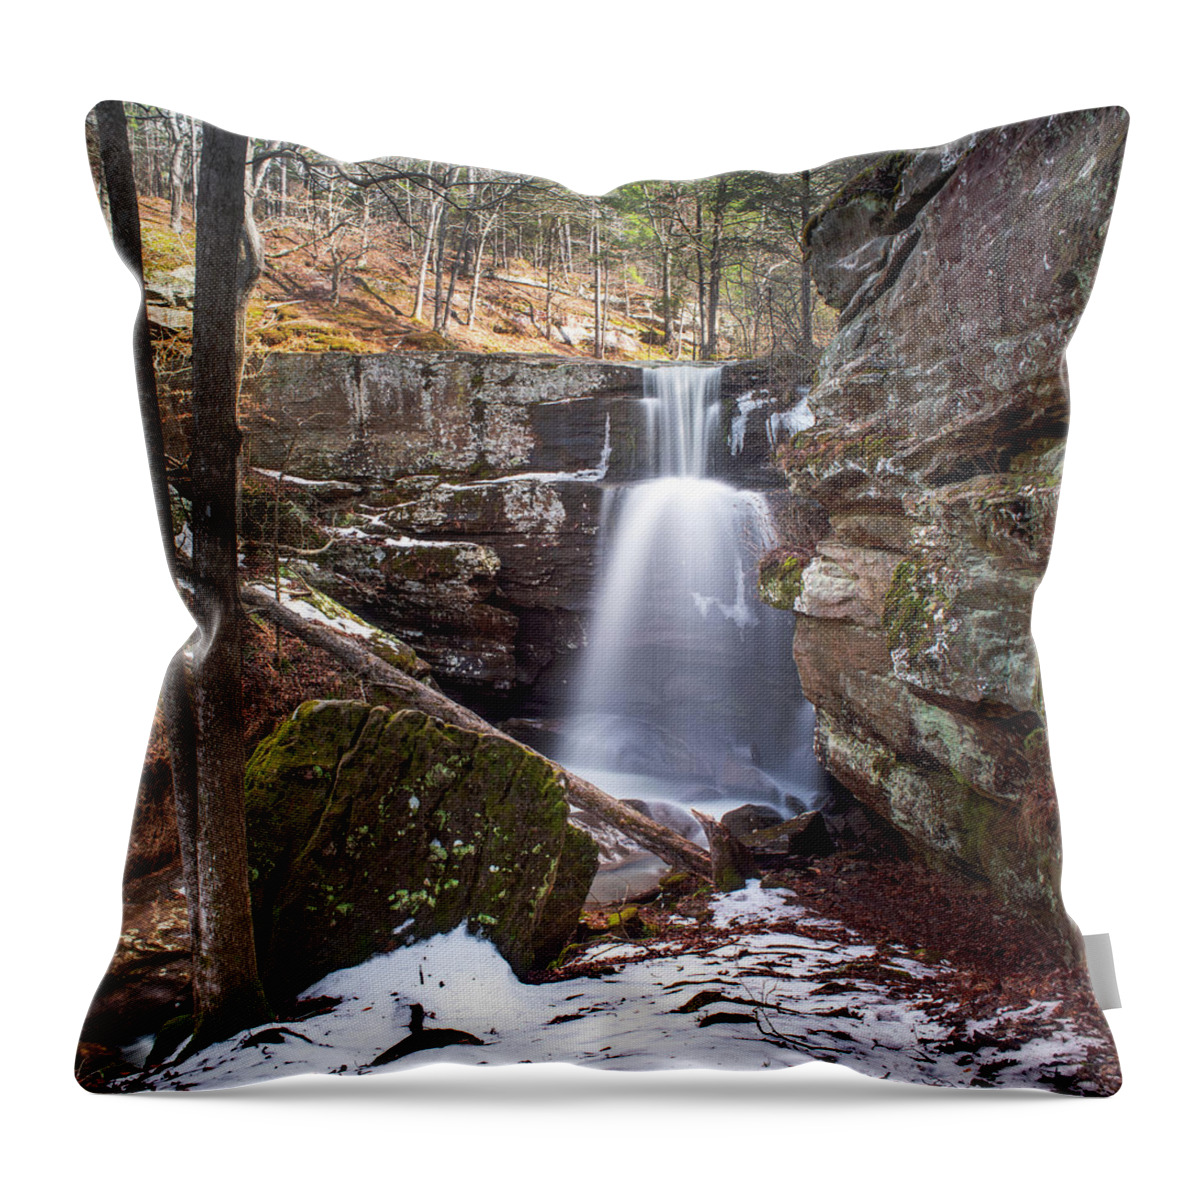 Waterfall Throw Pillow featuring the photograph Burden Falls by Grant Twiss